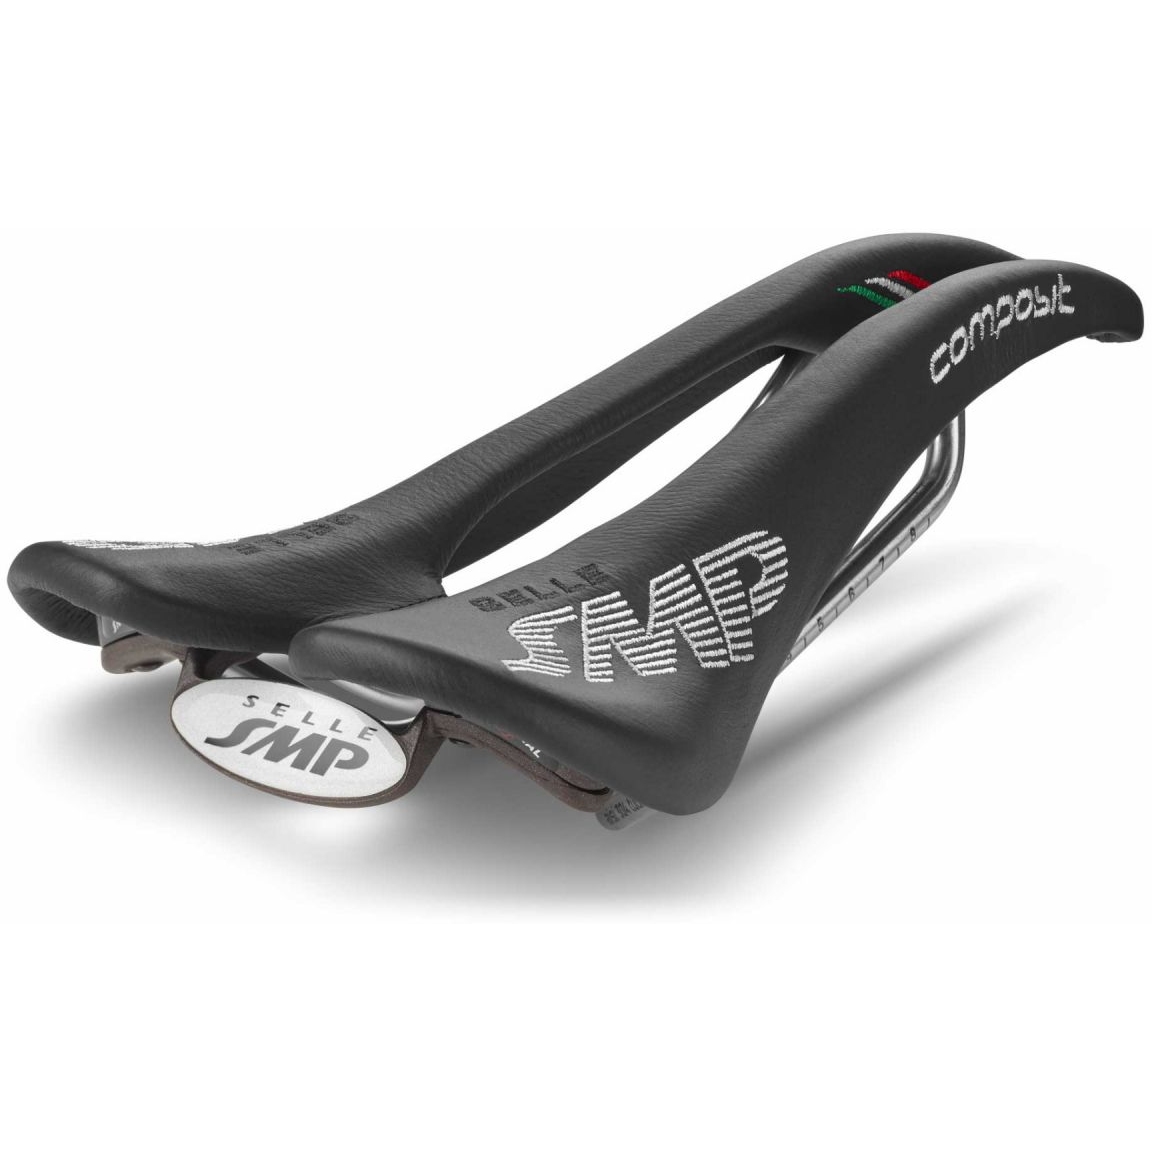 Picture of Selle SMP Composit Saddle - black